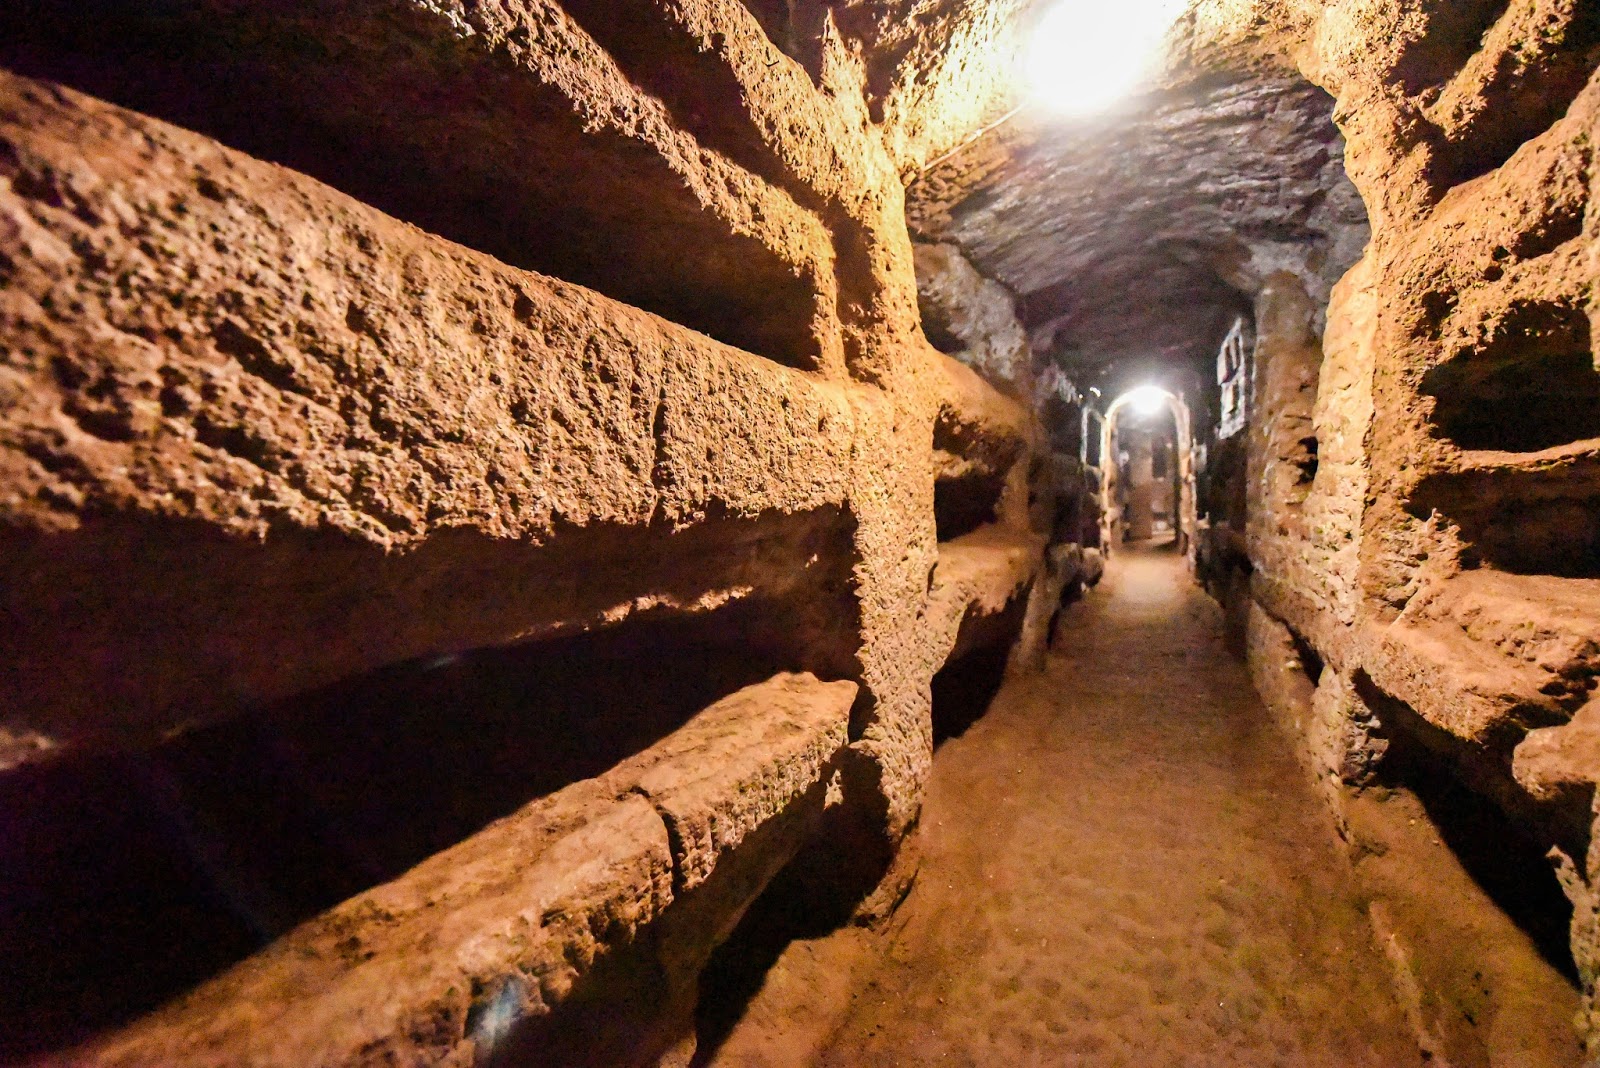 sps-theology-iv-rome-2016-day-18-thur-jan-21-catacombs-of-saint